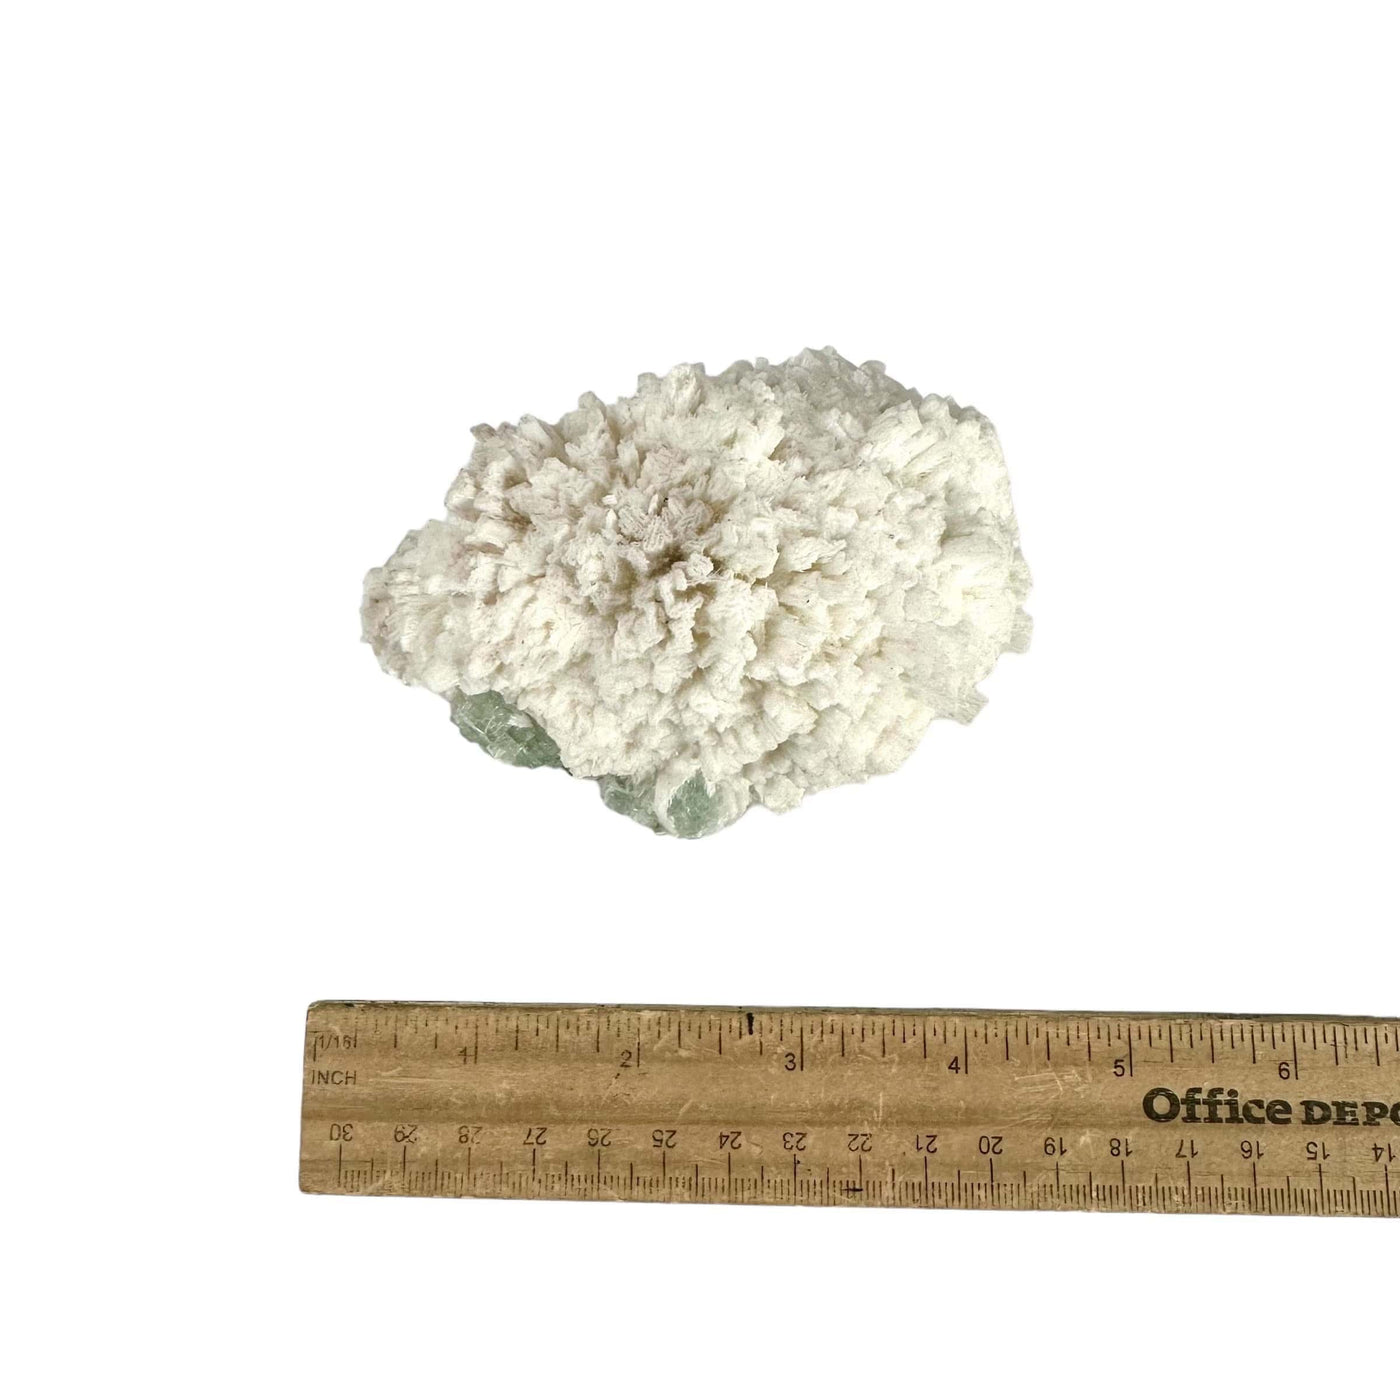 Zeolite with Green Apophyllite on Matrix - Crystal Formation - top view with ruler for size reference